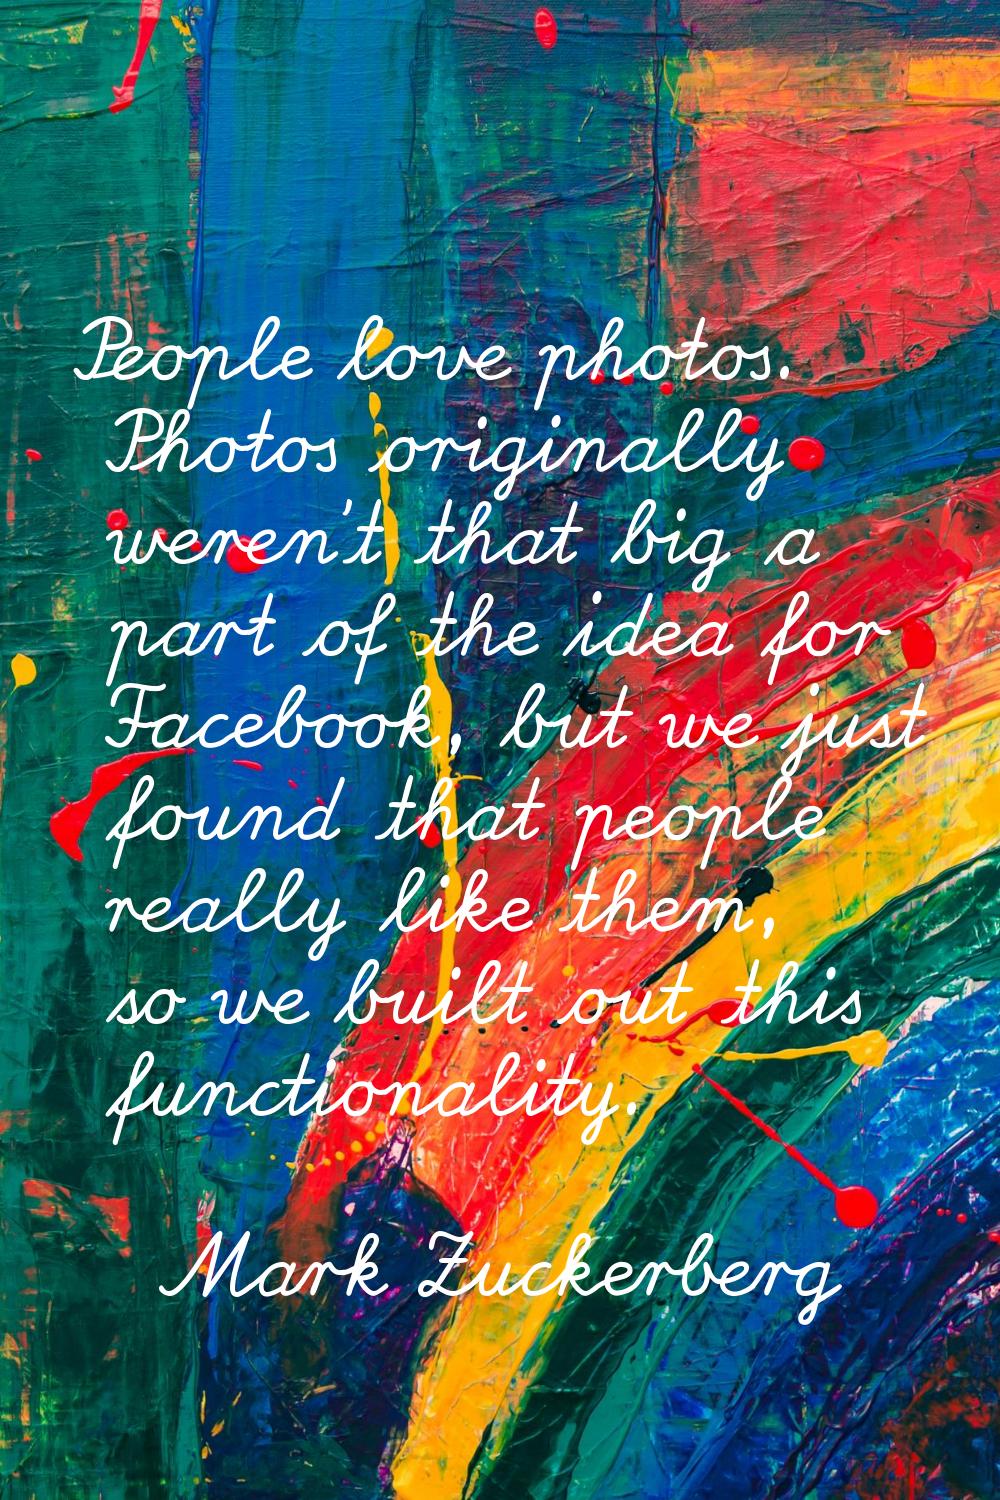 People love photos. Photos originally weren't that big a part of the idea for Facebook, but we just